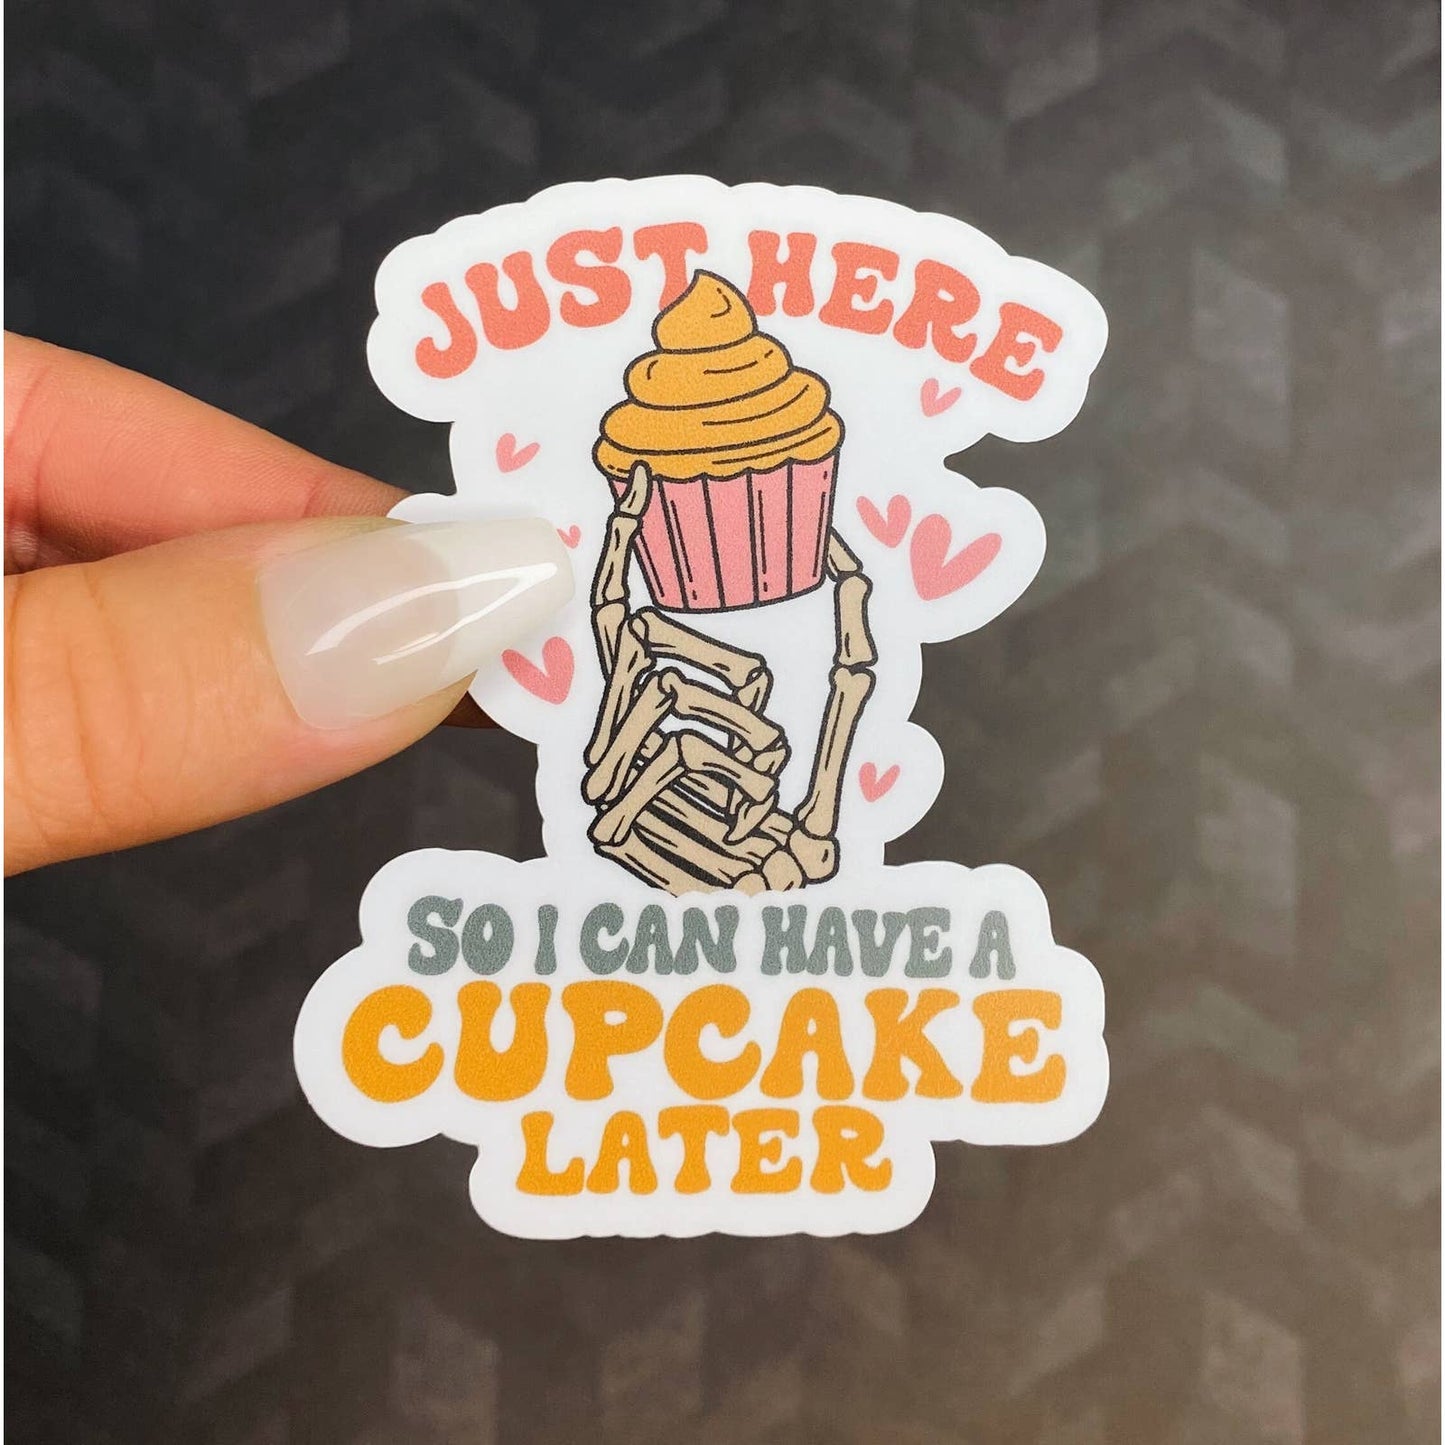 Funny Gym Sticker - Just Here So I Can Have A Cupcake Later - for Gym Water Bottle, Lifters, Weightlifting gift - Gym Stickers for Women